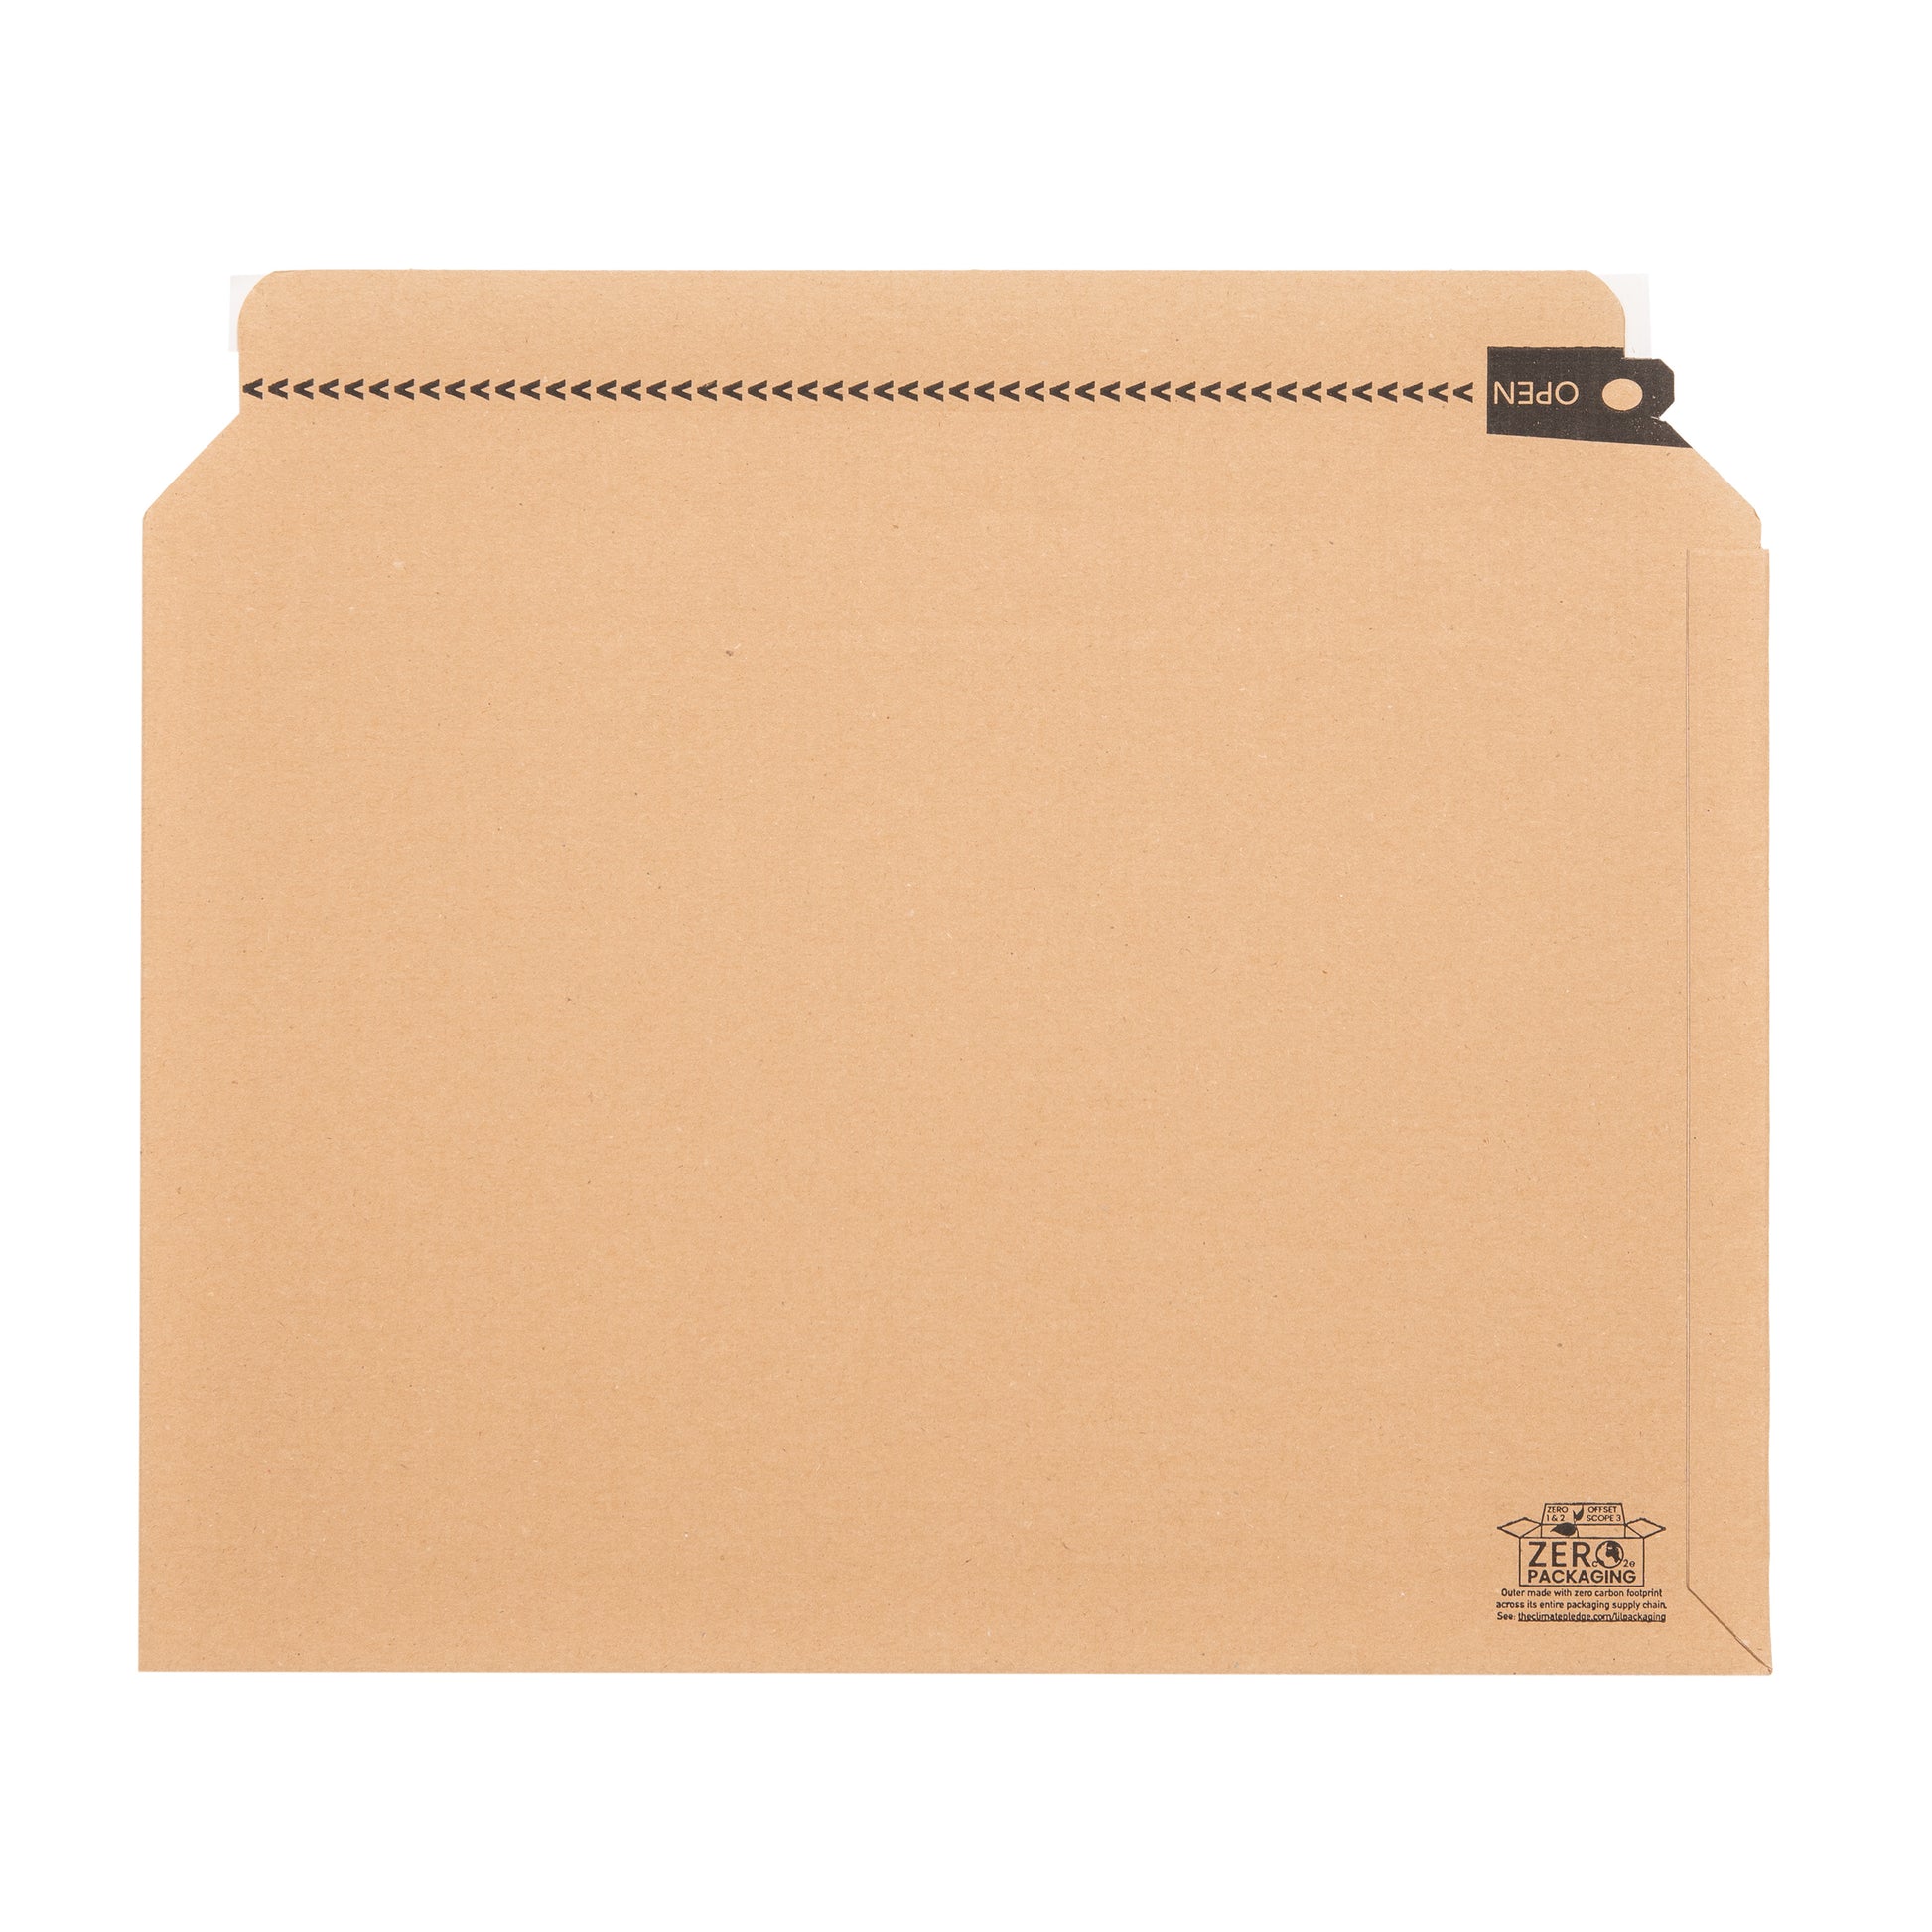 A2 Cardboard Envelope Mailer With Boxform | Lil Packaging